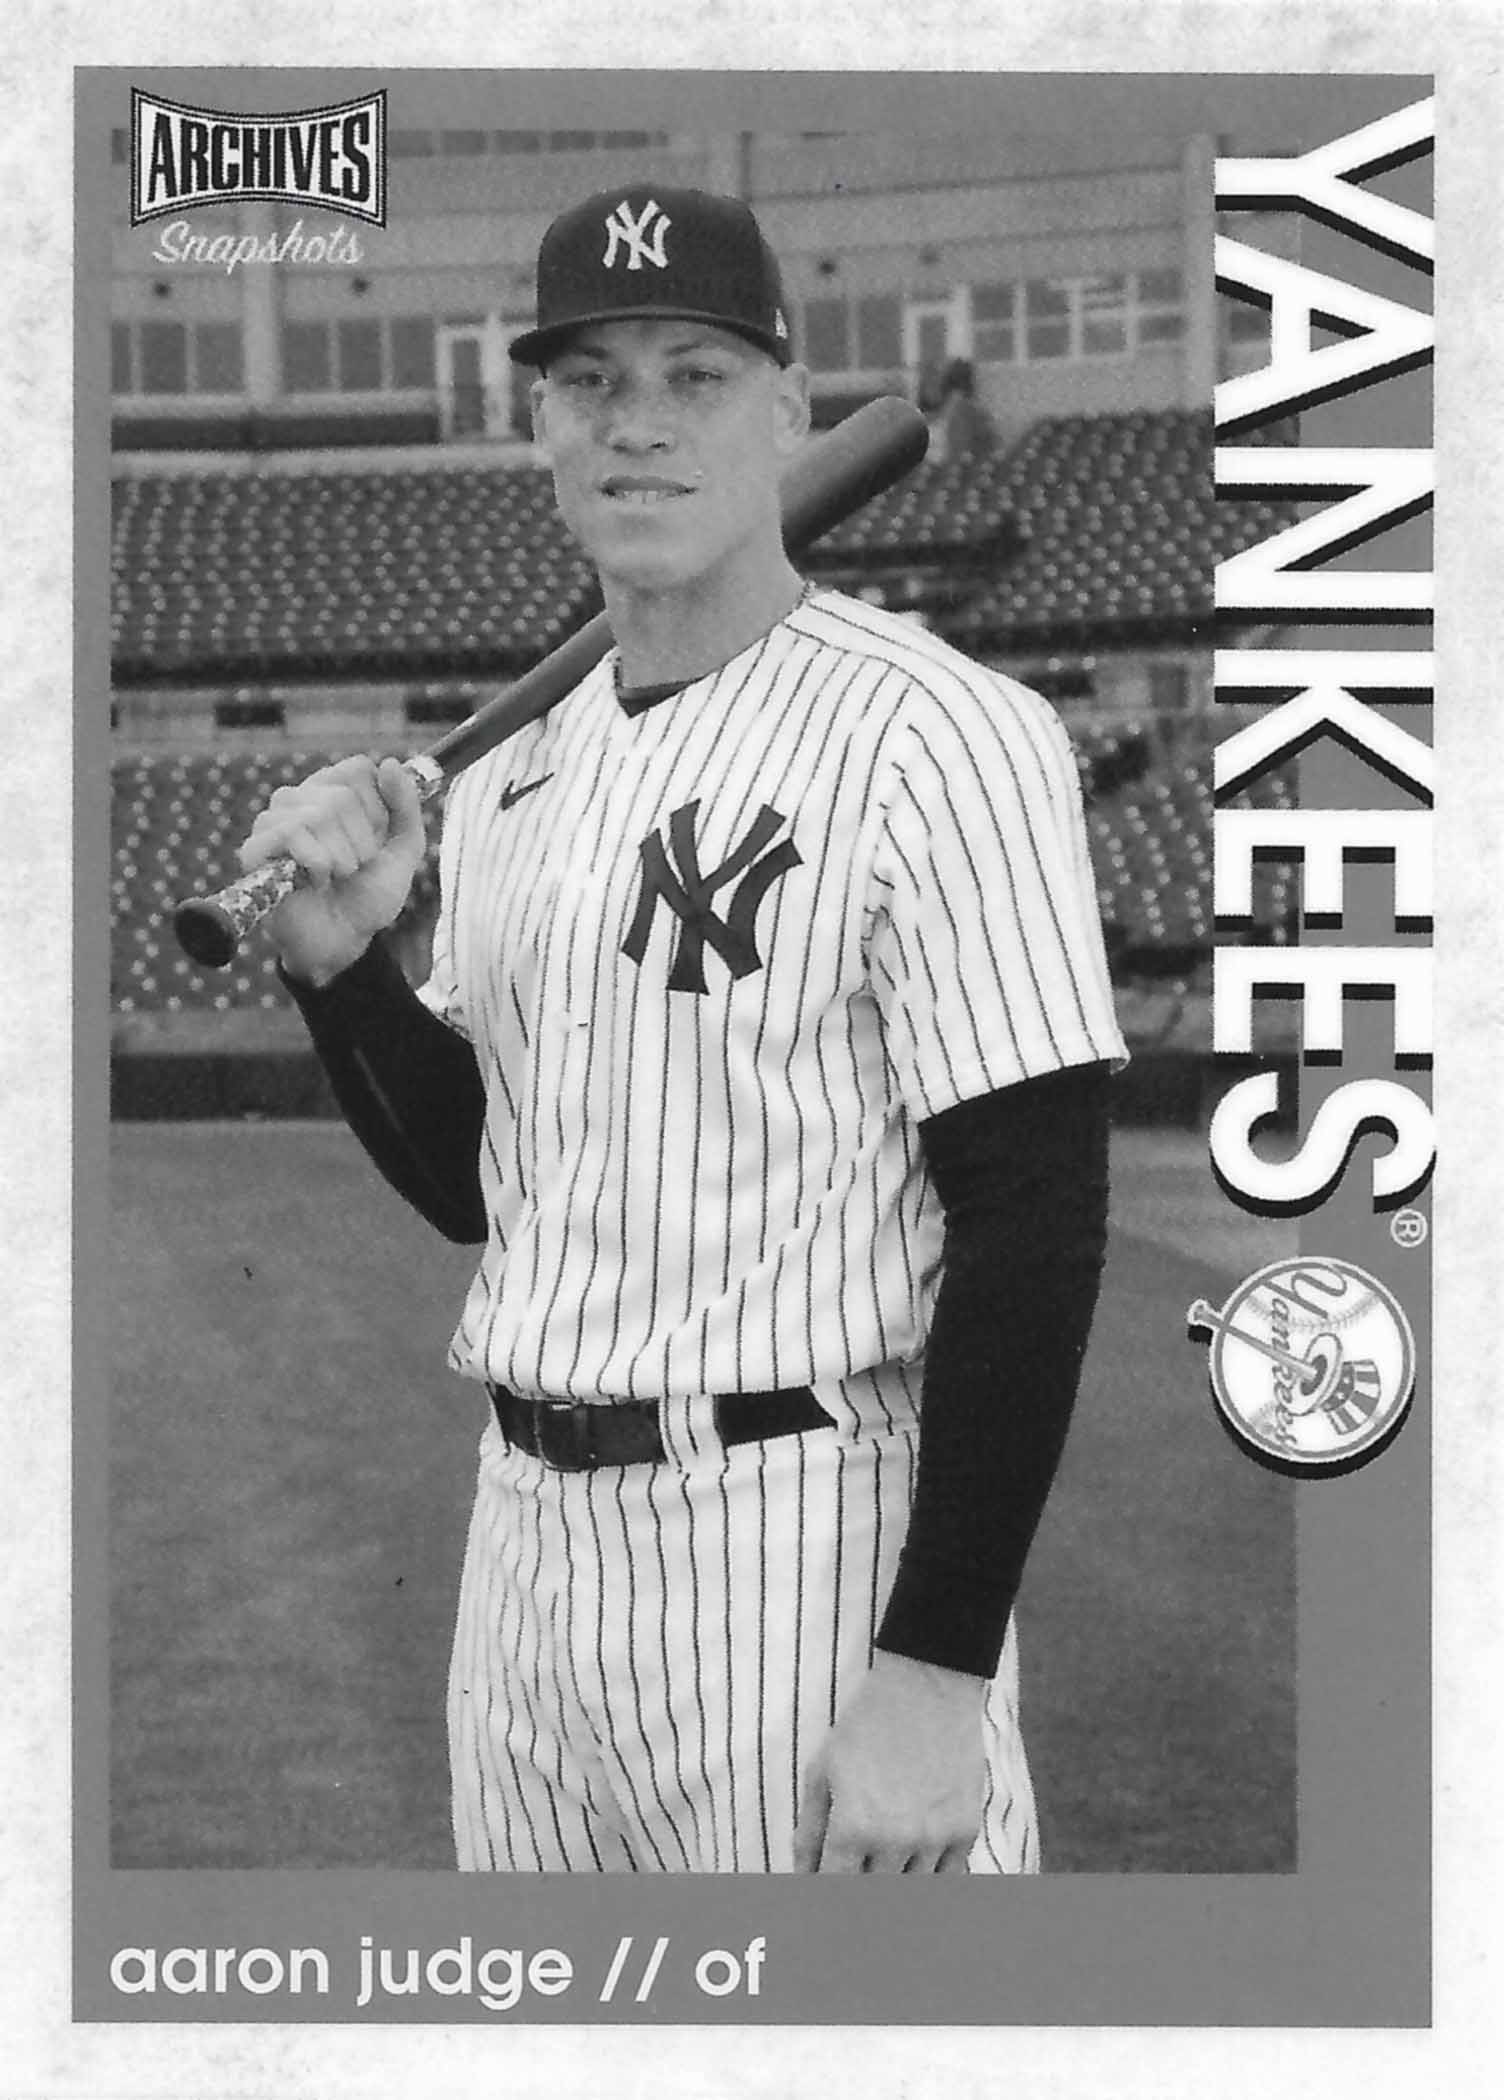 2022 Topps Archives Snapshots Black and White